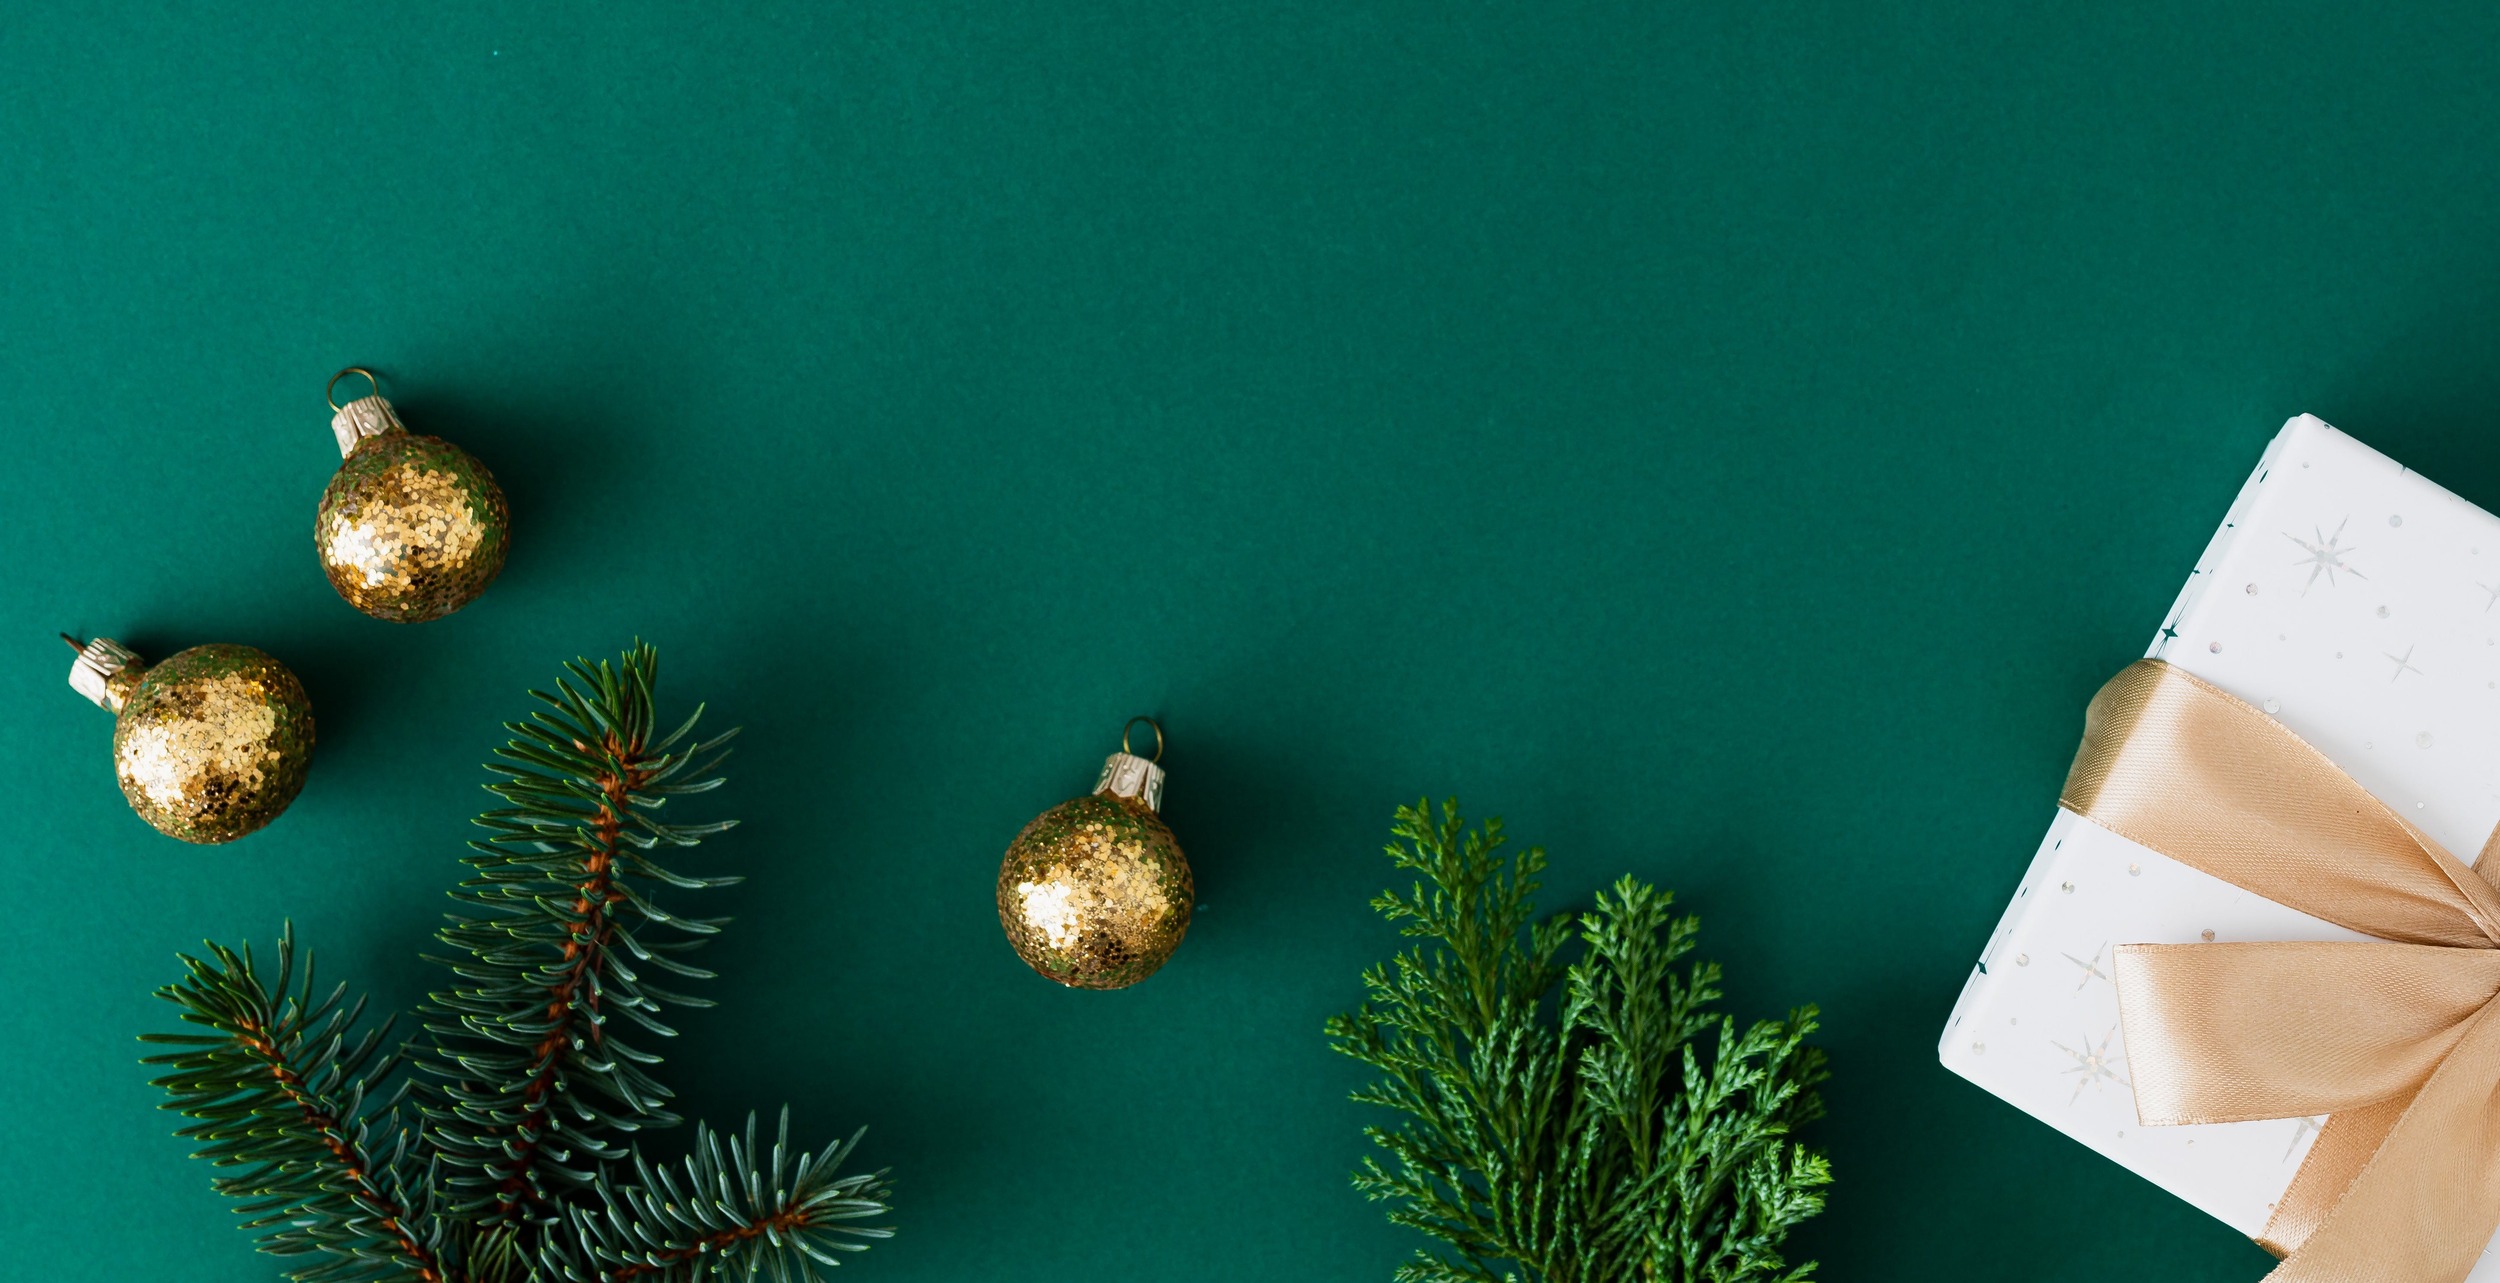 How To Level Up Your Home With Ornaments: It's Not Just for Holidays!